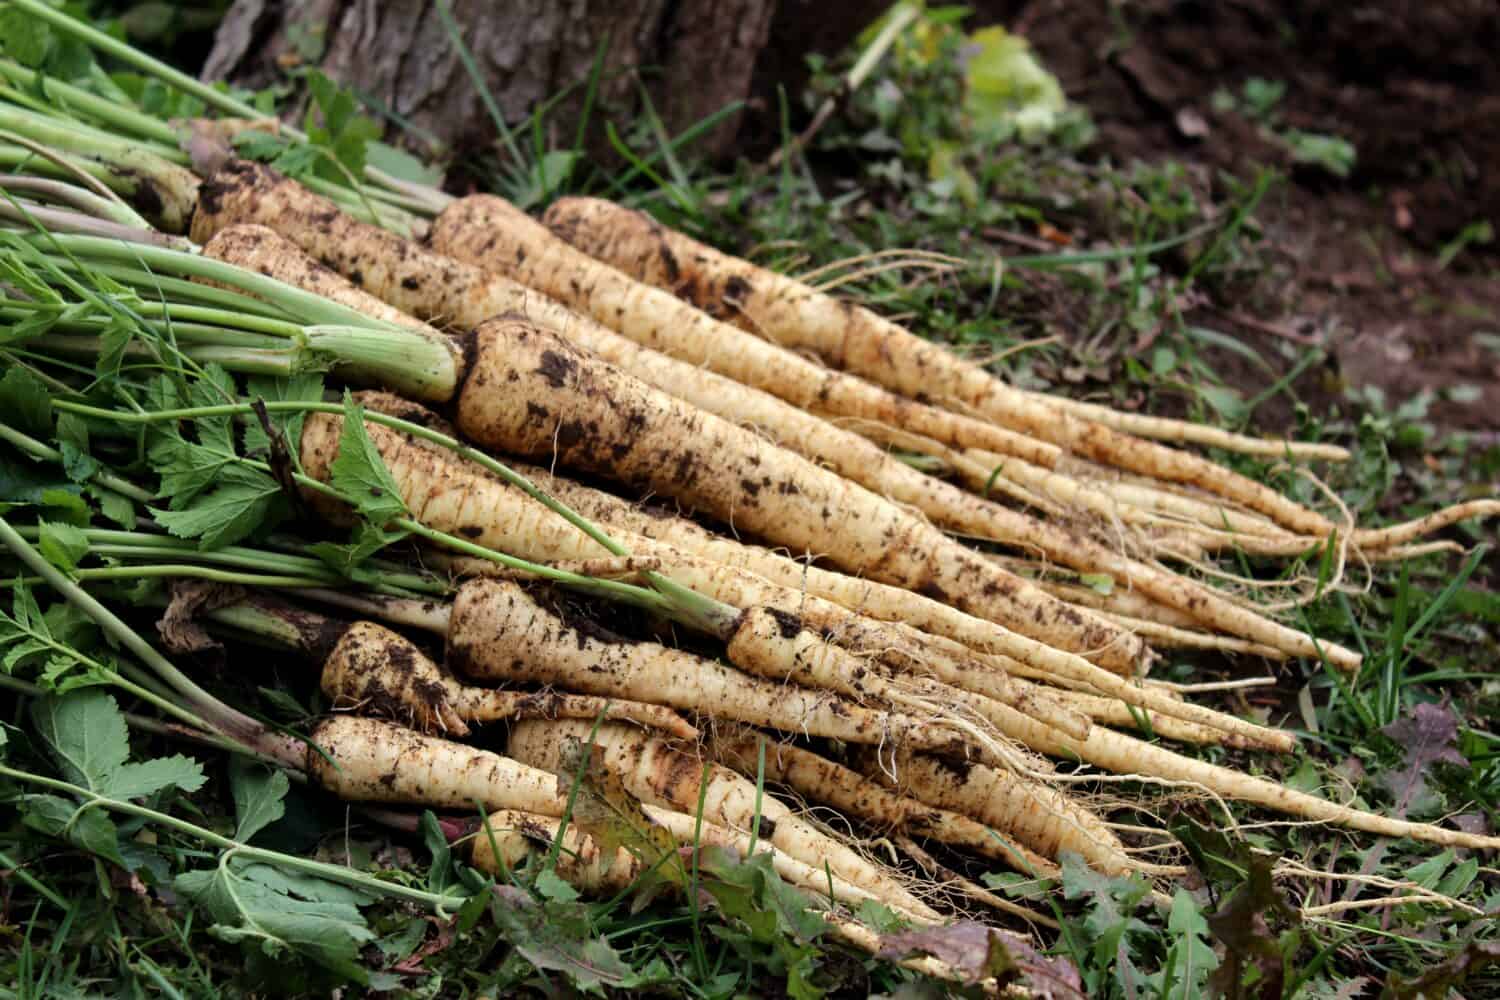 Fresh parsnips with leaves on the ground in a vegetable garden, close-up